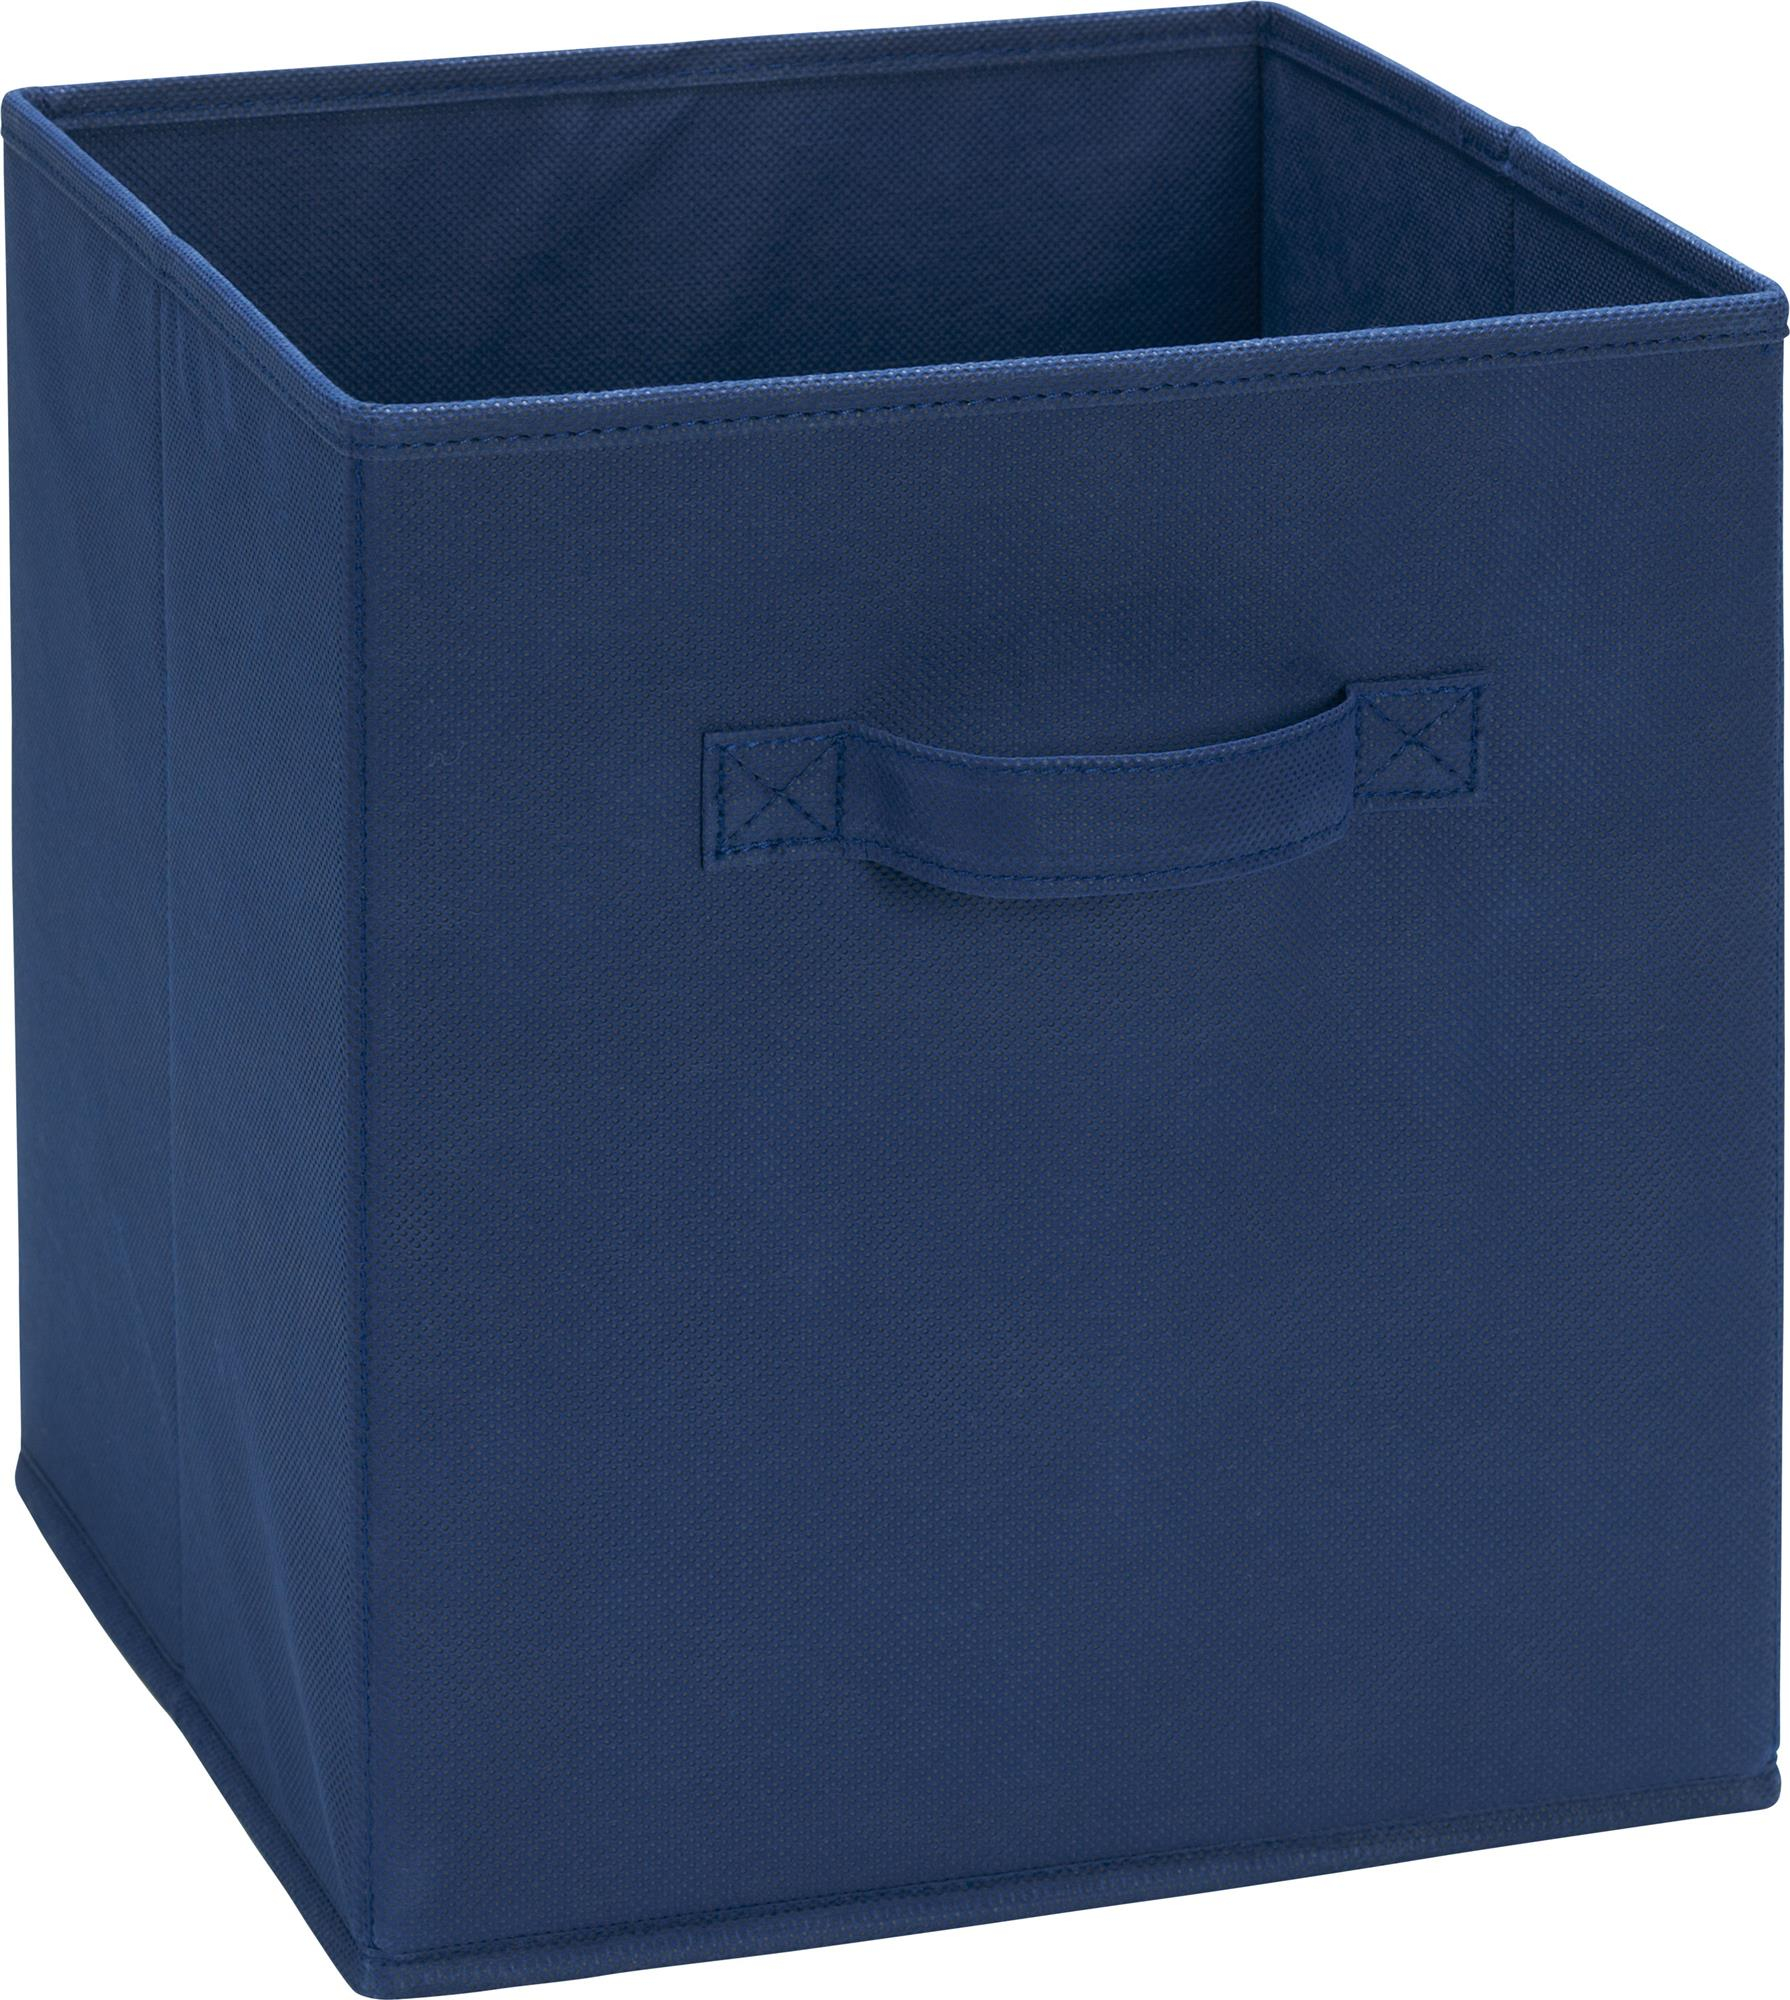 Ameriwood Furniture Master Pack Of 6 Fabric Bins Blue pertaining to sizing 1790 X 2000